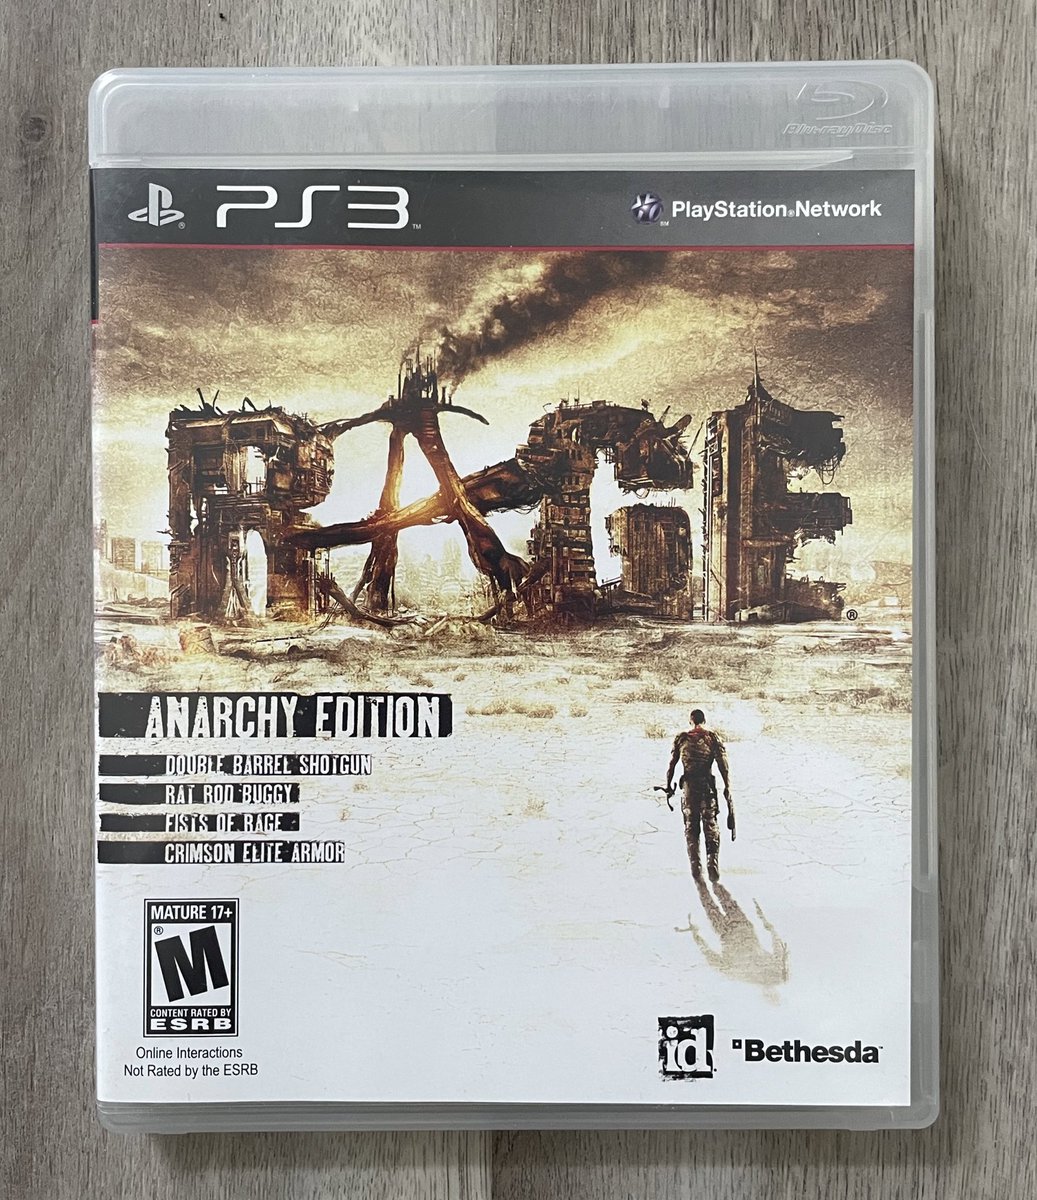 #PlayStation 3 
Showcase 031:

Title: Rage
Developer: @idSoftware 
Publisher: @bethesda 
Released: 2011

What did you like/dislike about Rage? https://t.co/3KXkFCGVq9